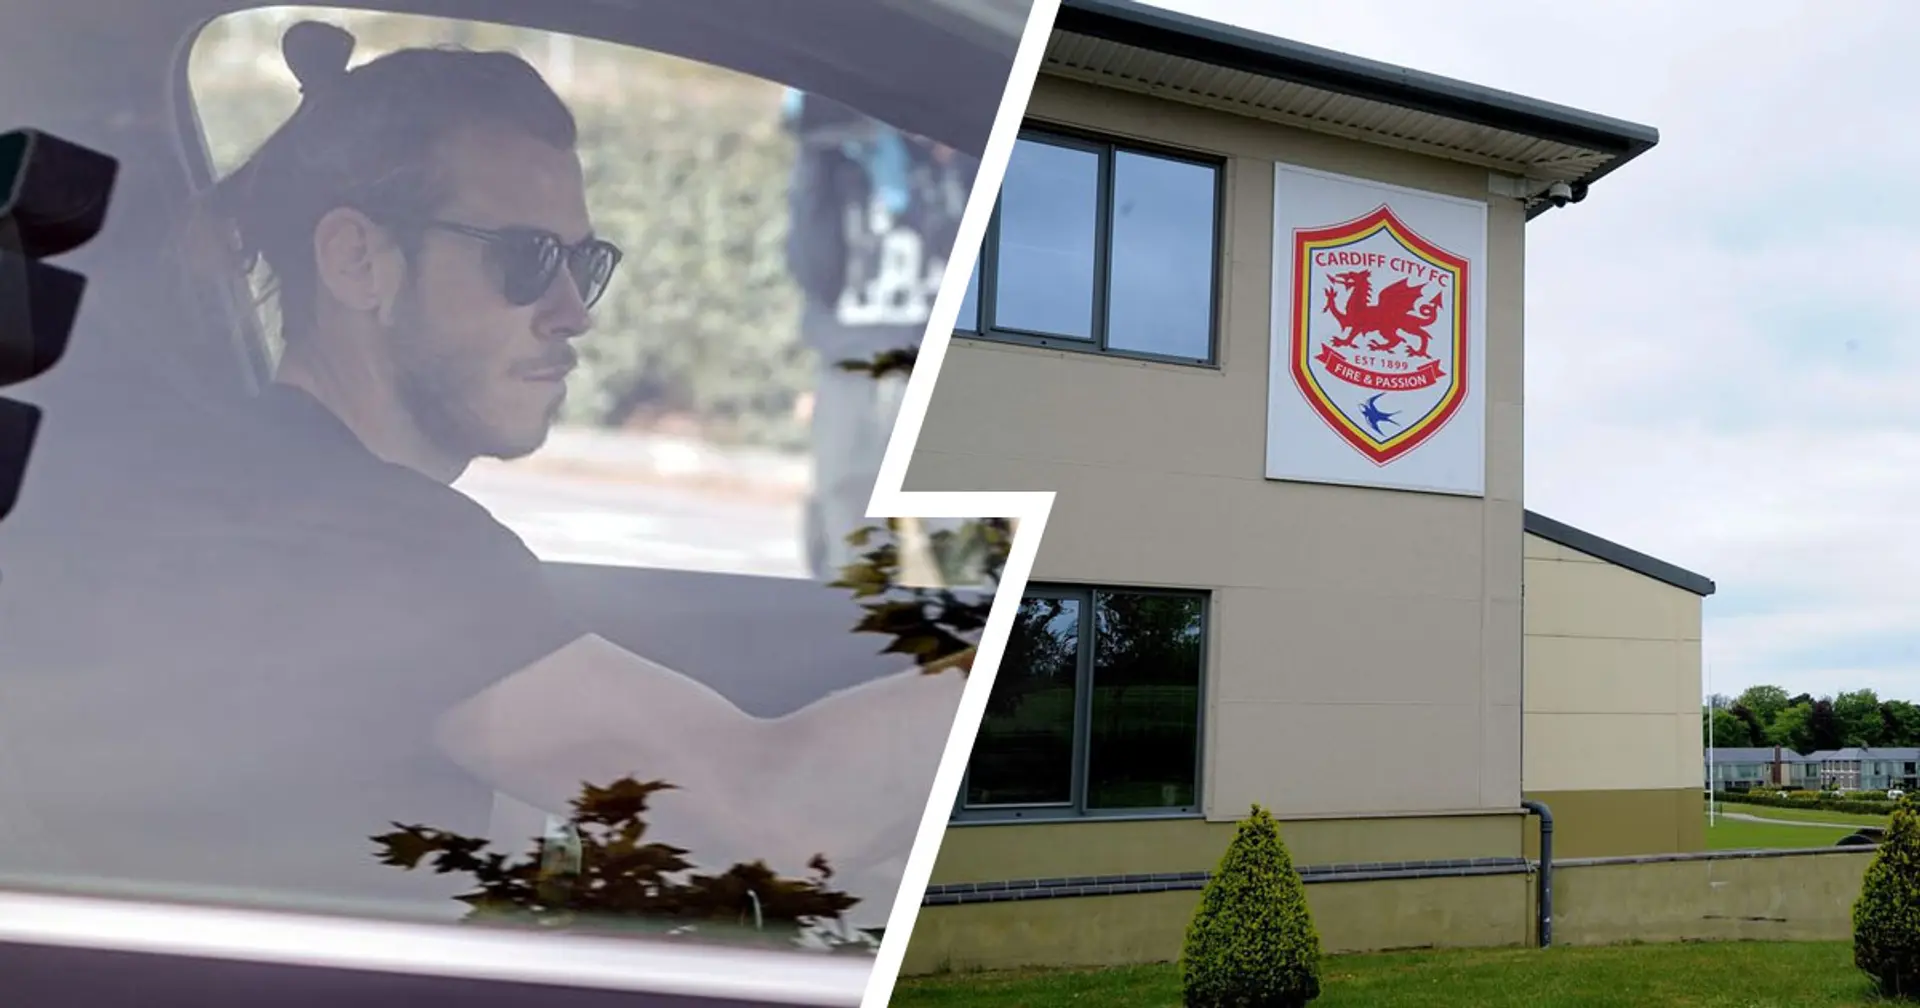 Gareth Bale visits Cardiff City ground to chat with manager Steve Morison amid rumours of potential move